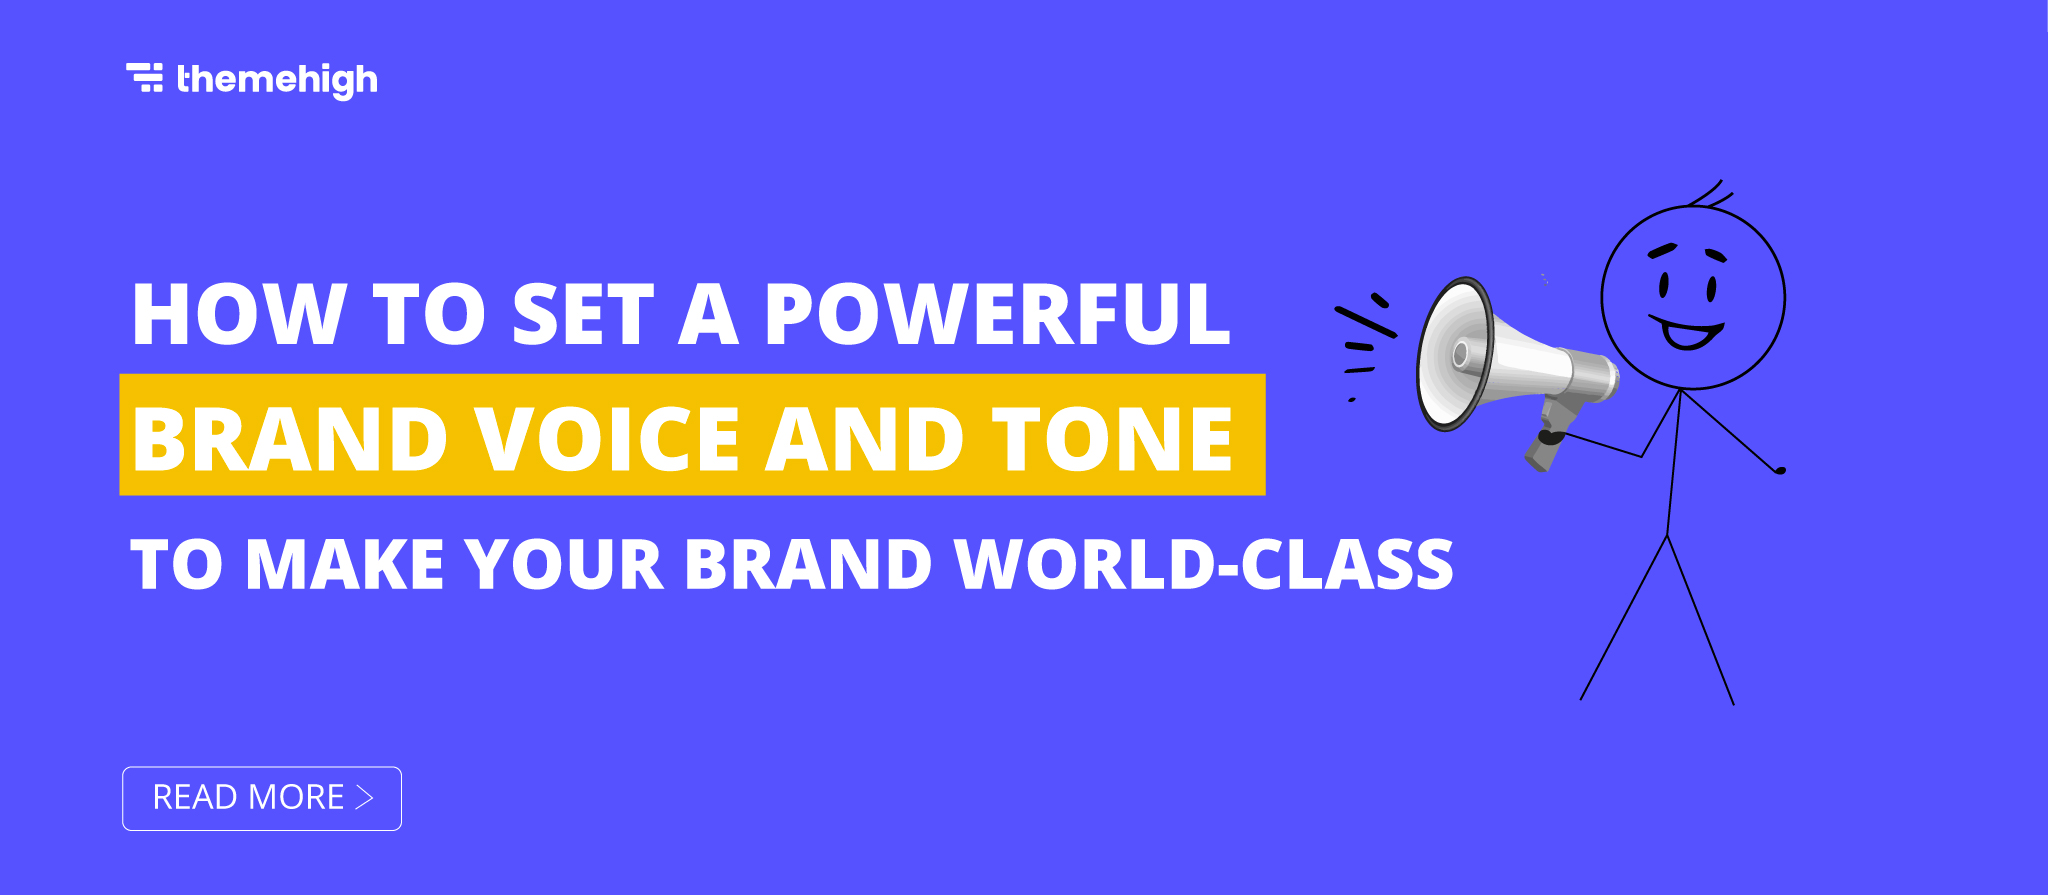 The title - How to Set Powerful Brand Voice and Tone to Make Your Brand World-Class